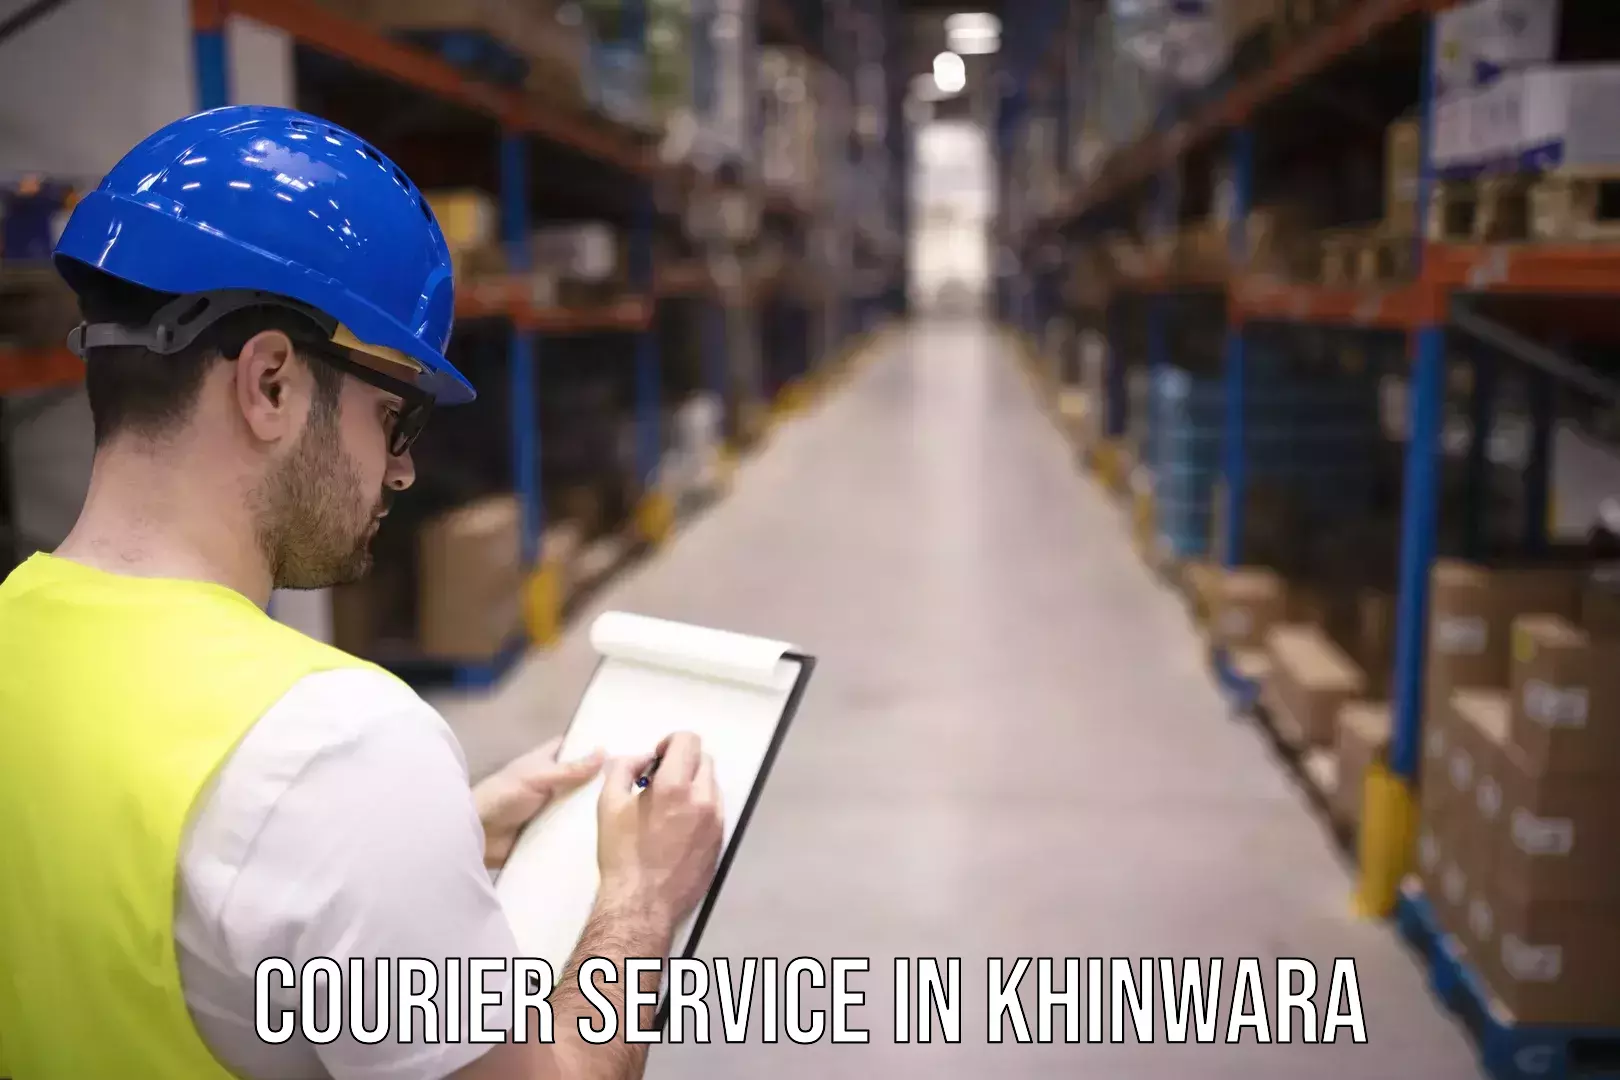 Fast delivery service in Khinwara